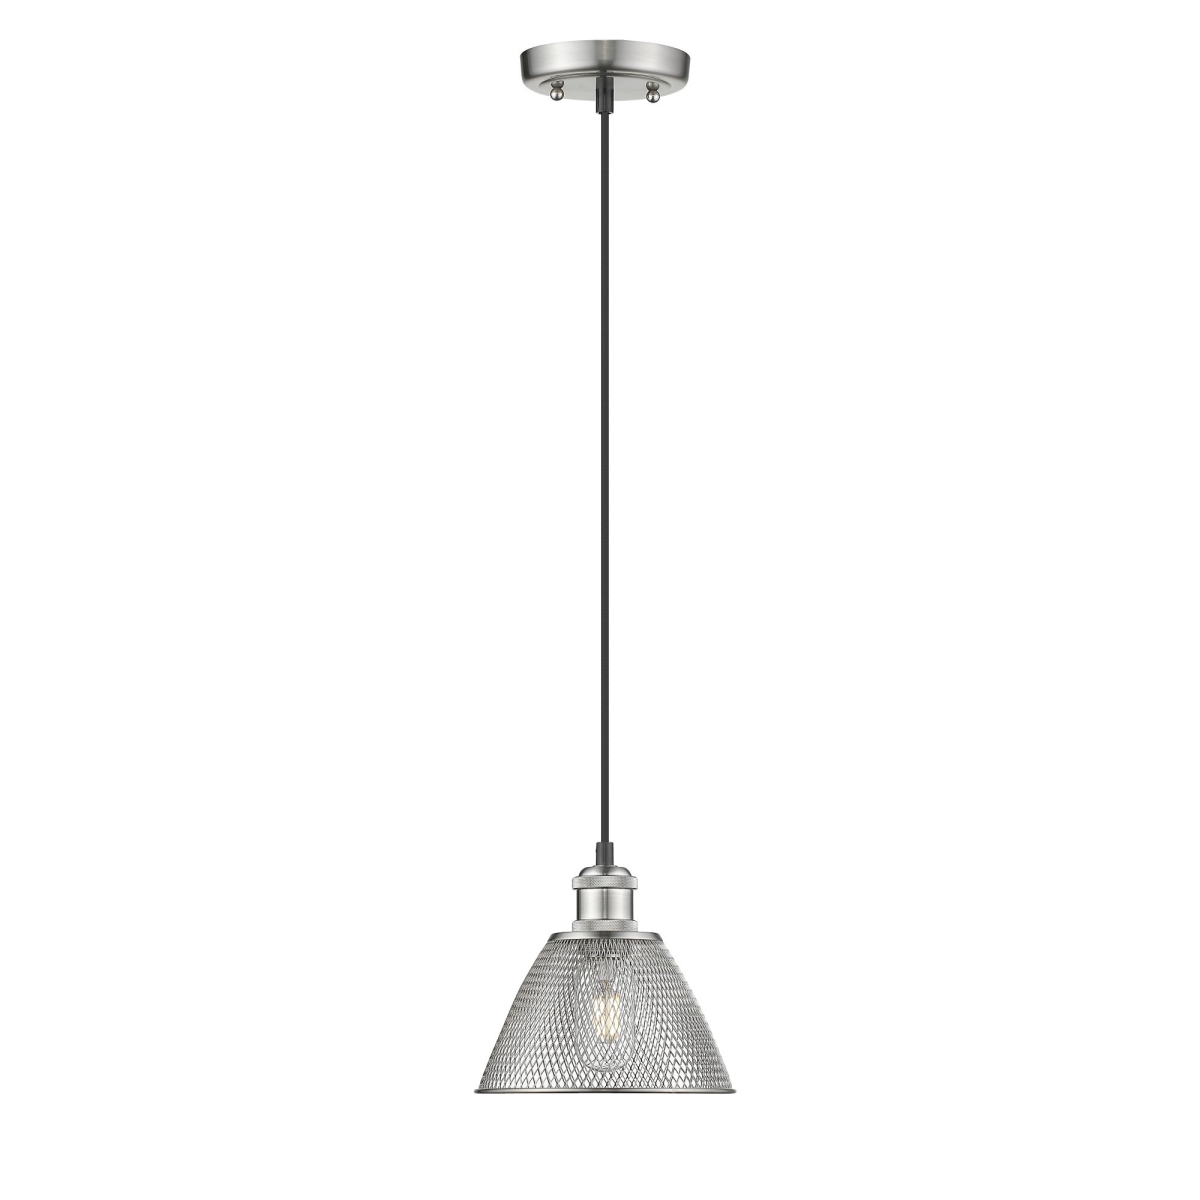 0304-s Pw 8 In. Carver 1 Lights Pewter Mini Pendant Ceiling Light With Mesh Shade, Silver - 120v